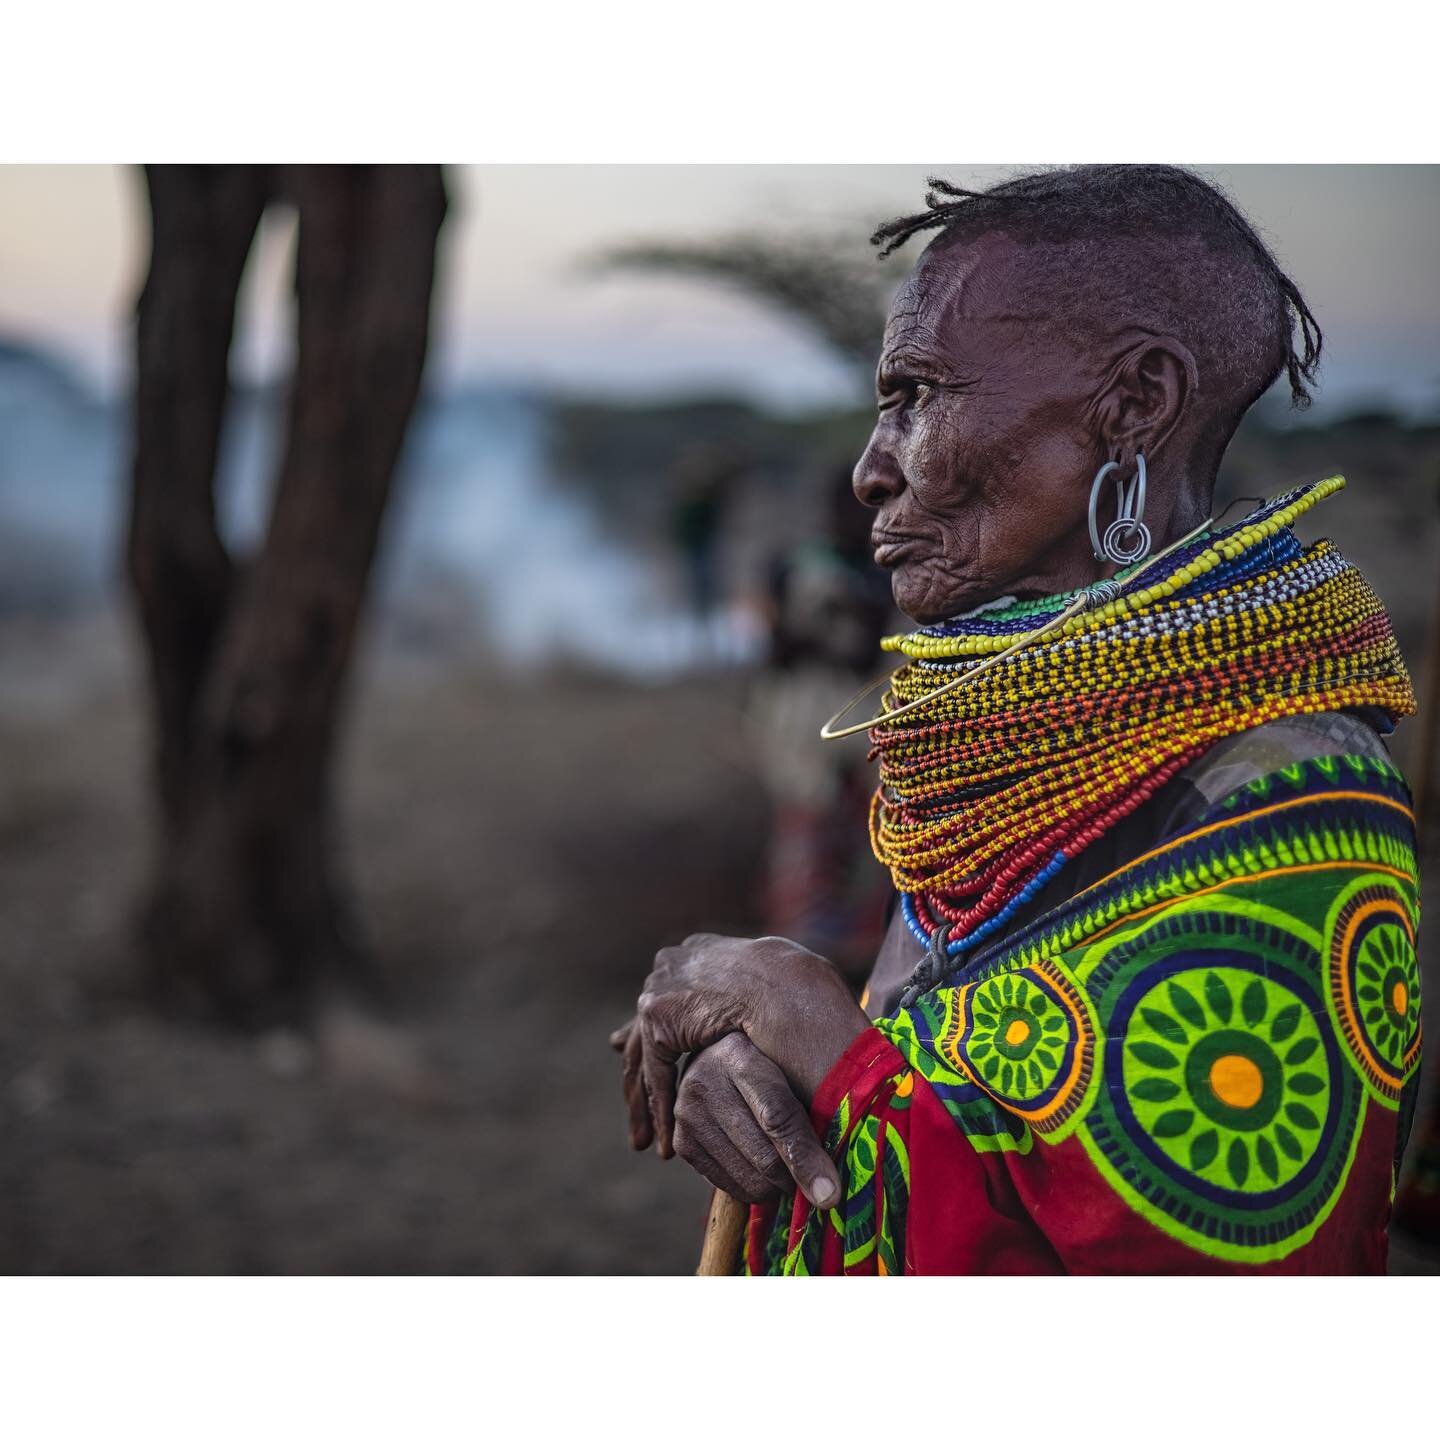 Mama Ngetai (which means &ldquo;someone who loves the livestock&rdquo;) watches as the village sacrifices a sheep to Akuj, the Turkana god of all things living &amp; dead. The village is facing one of the driest times in memory &amp; the hope for the